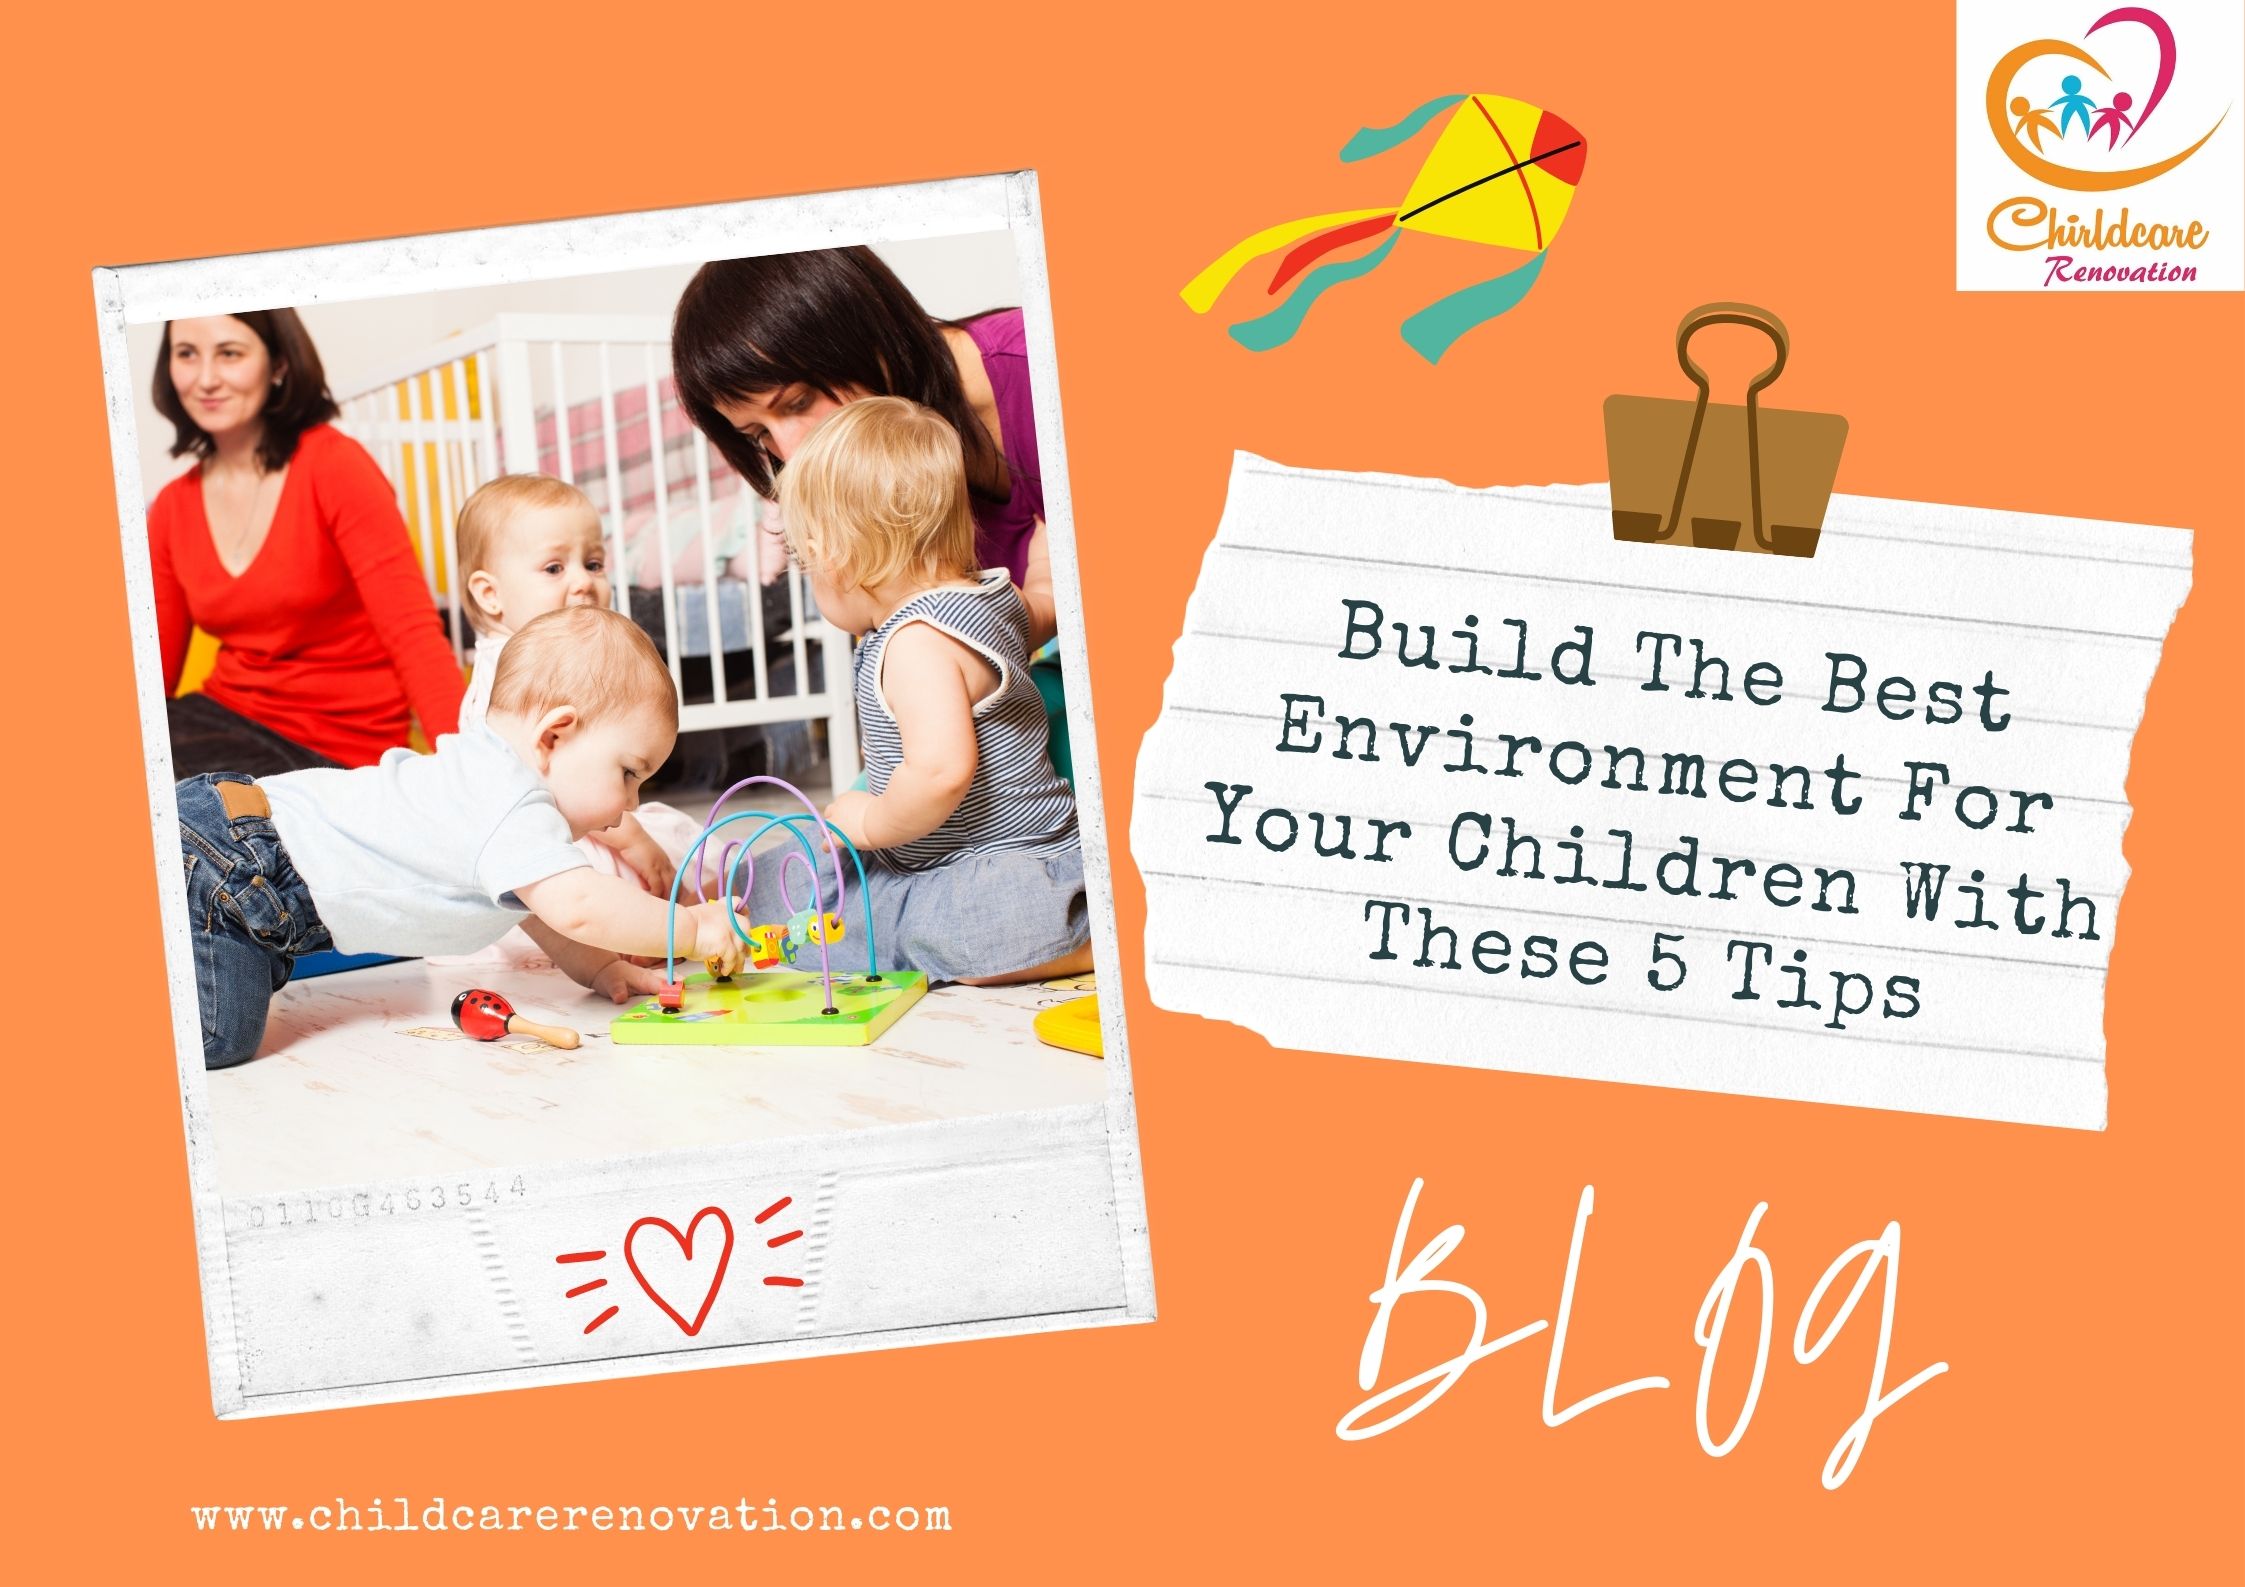 Build The Best Environment For Your Children With These 5 Tips